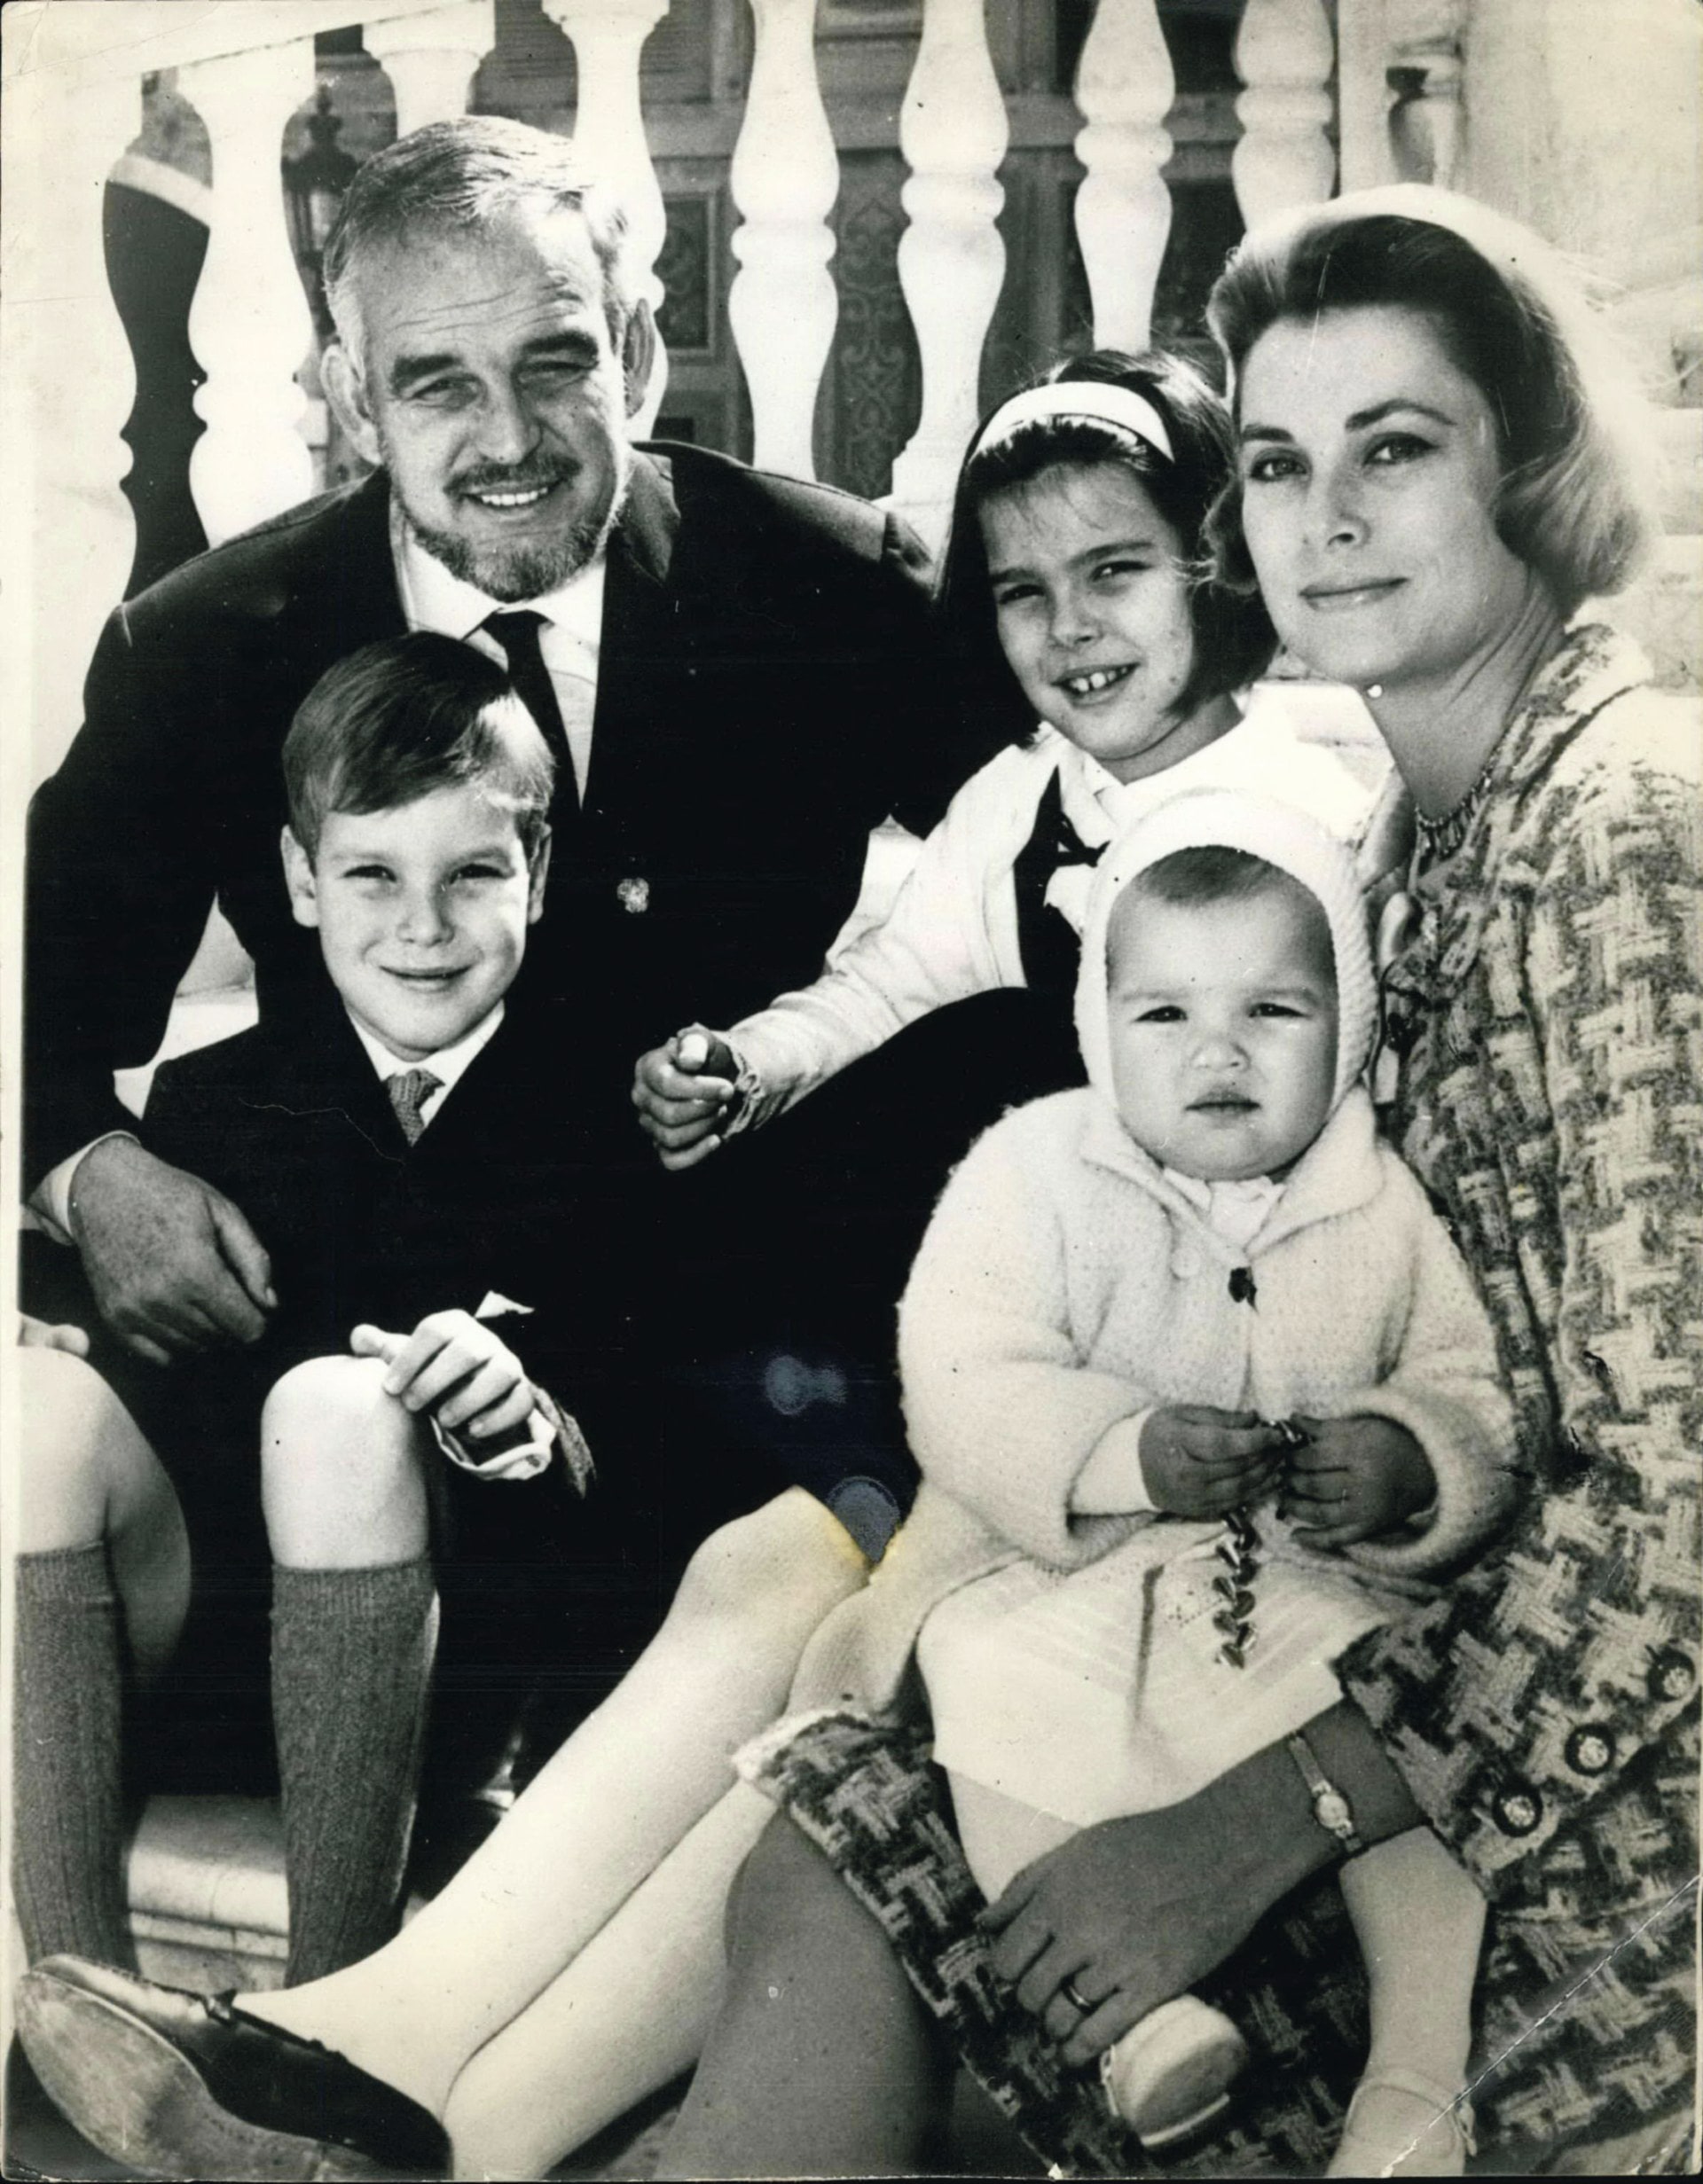 Prince Rainier III and Grace Kelly with their family